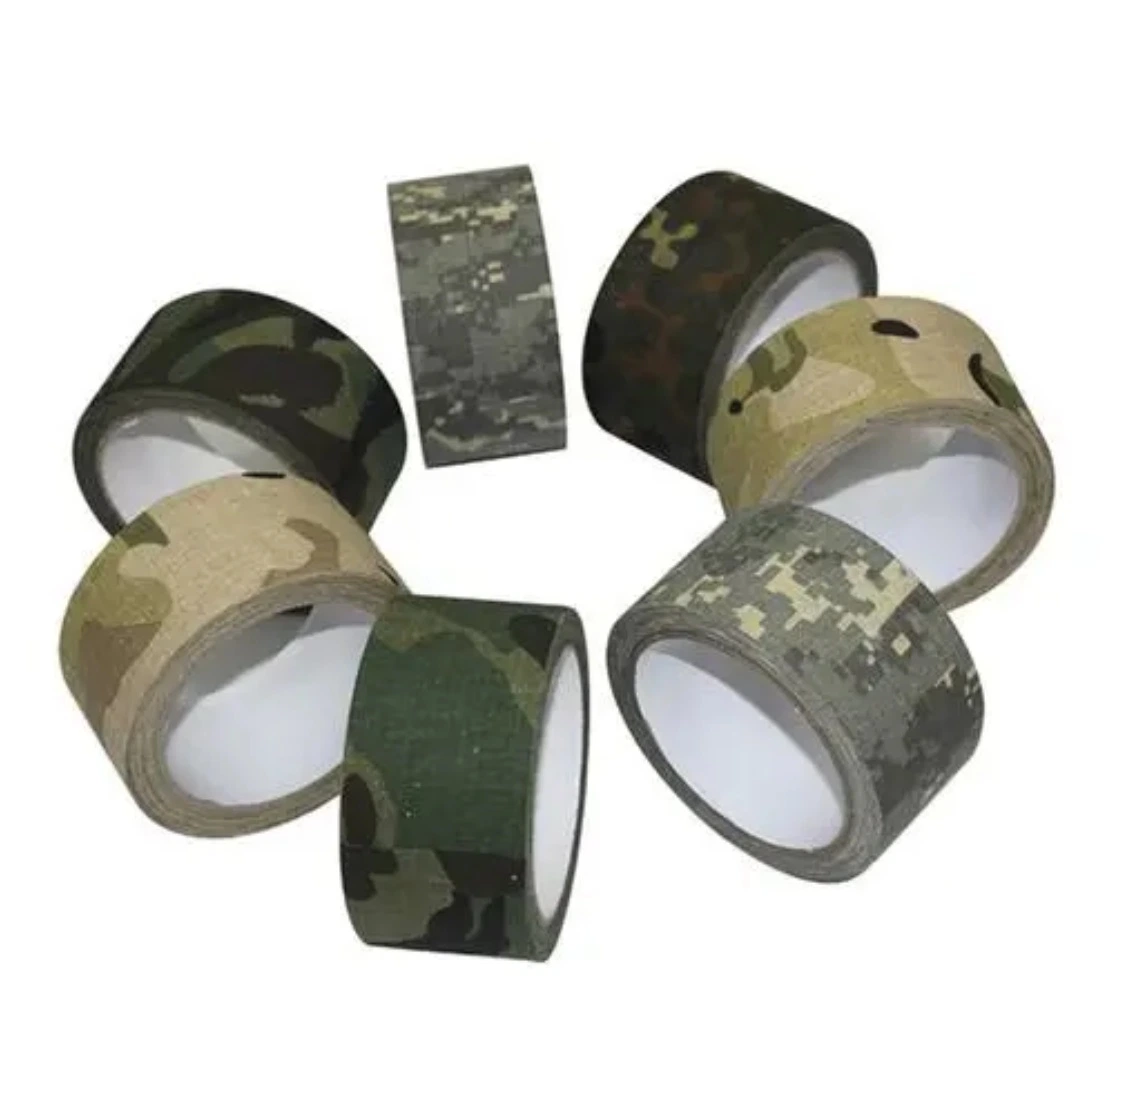 Colorful Compression Rigid Tape Sports Tape Athletic Cotton Tape Friendly to The Skin 1.5"